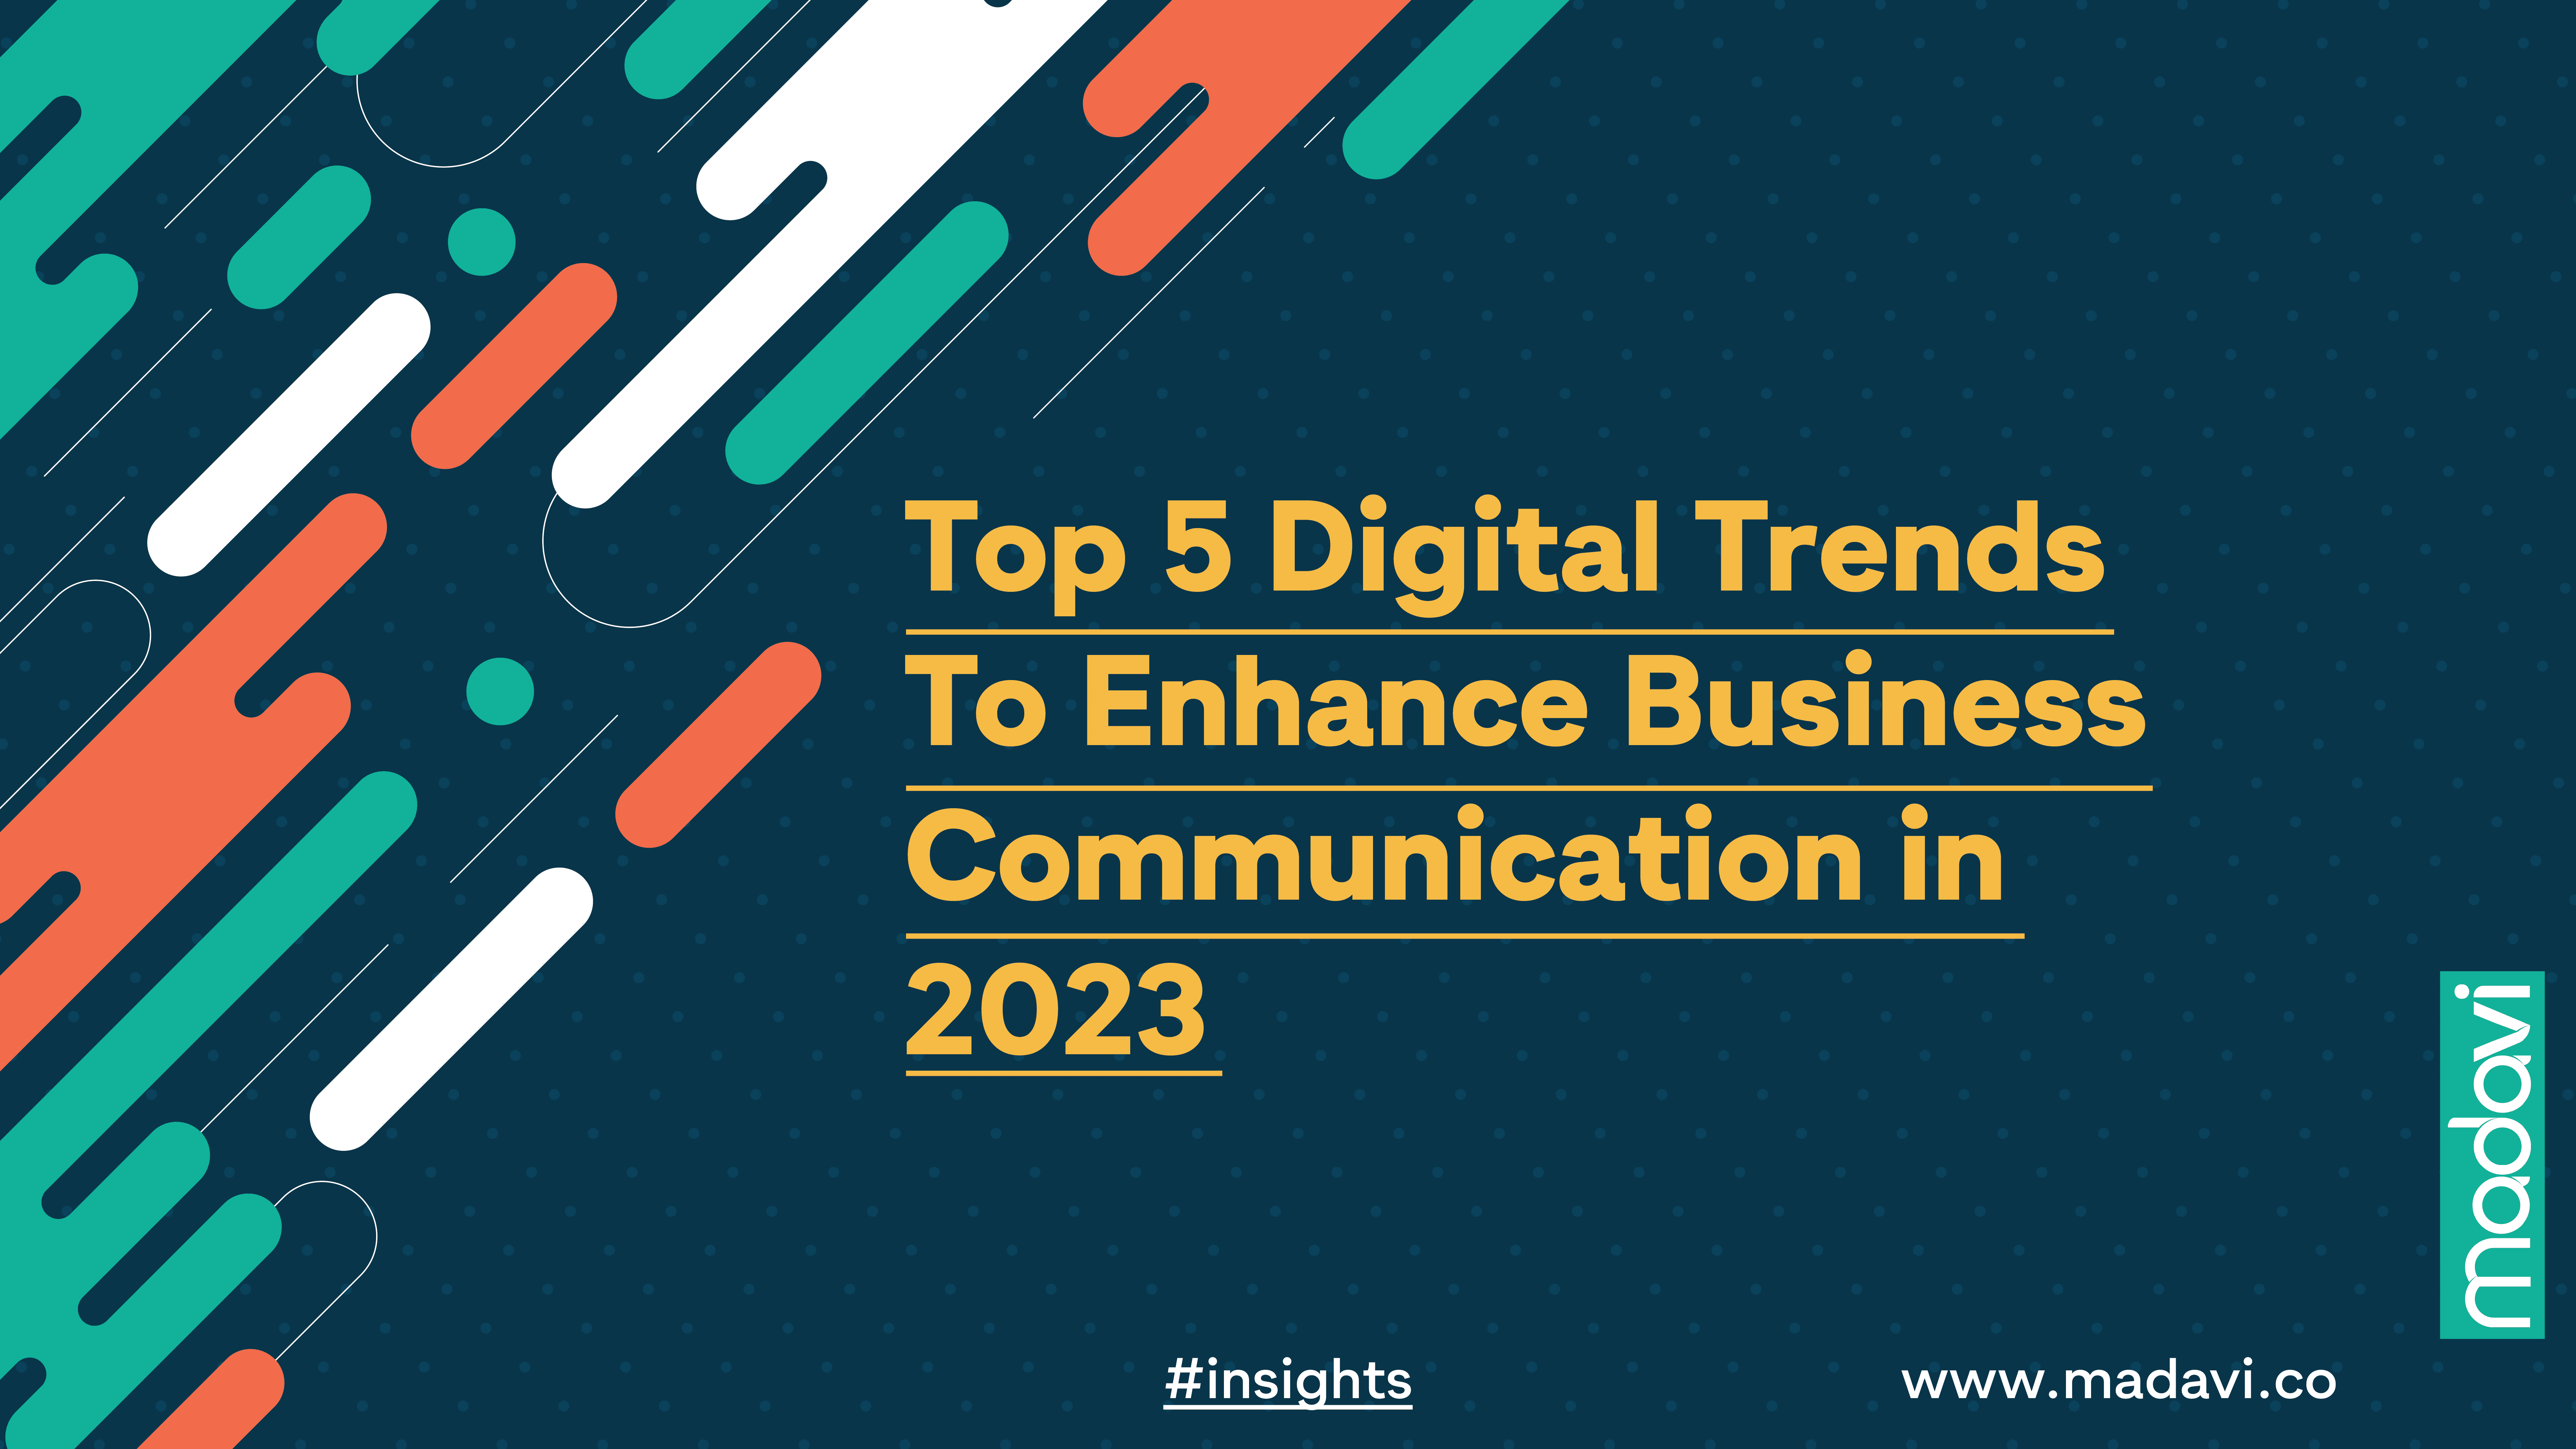 Top 5 Digital Trends To Enhance Business Communication in 2023 01